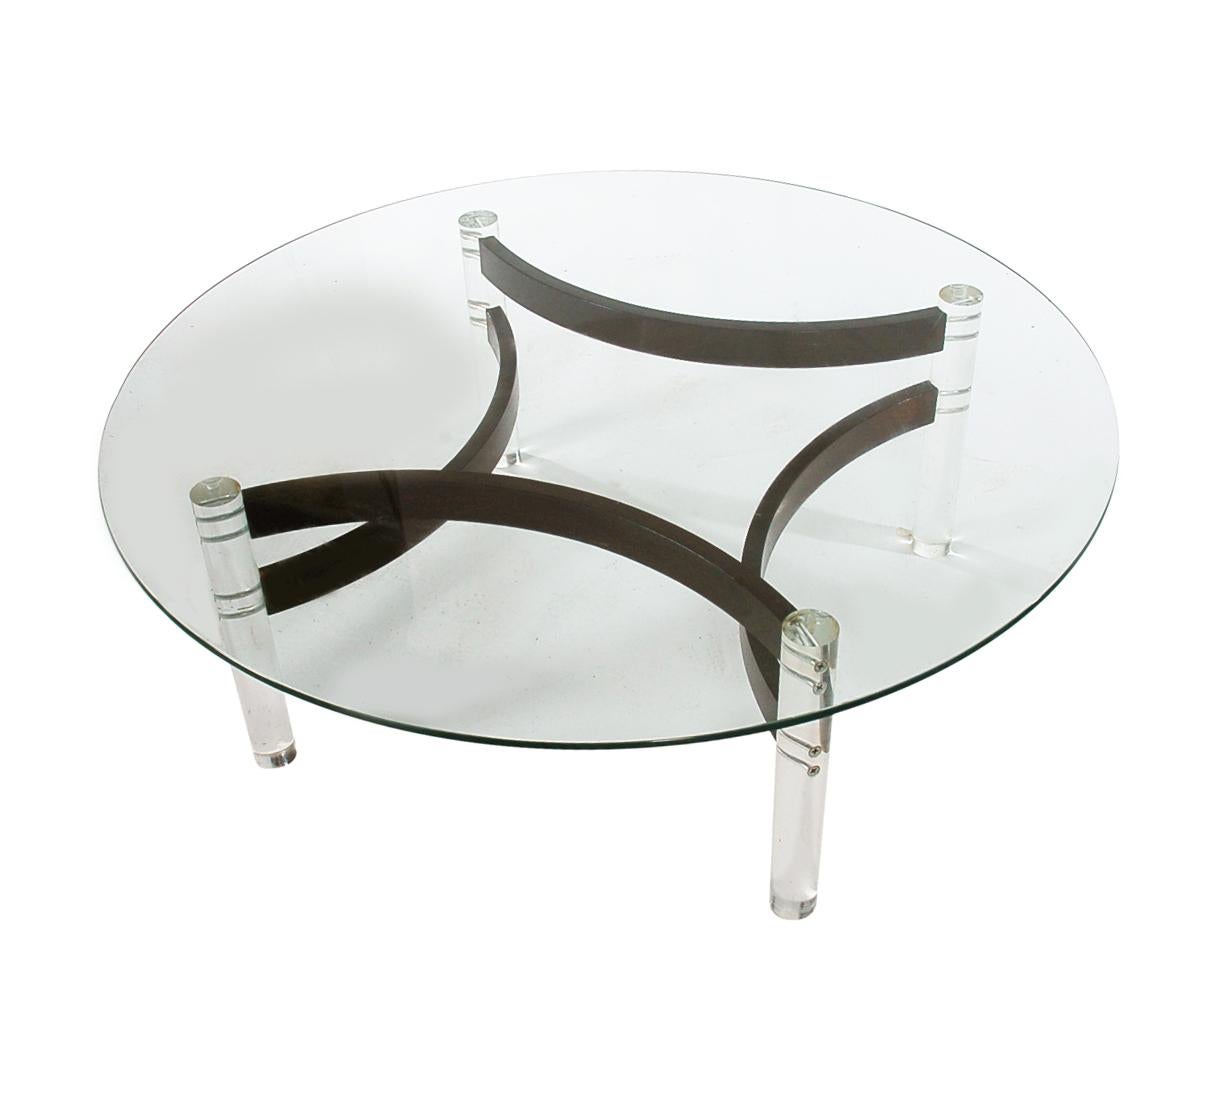 Midcentury Danish Modern Lucite, Bentwood and Glass Circular Cocktail Table In Good Condition For Sale In Philadelphia, PA